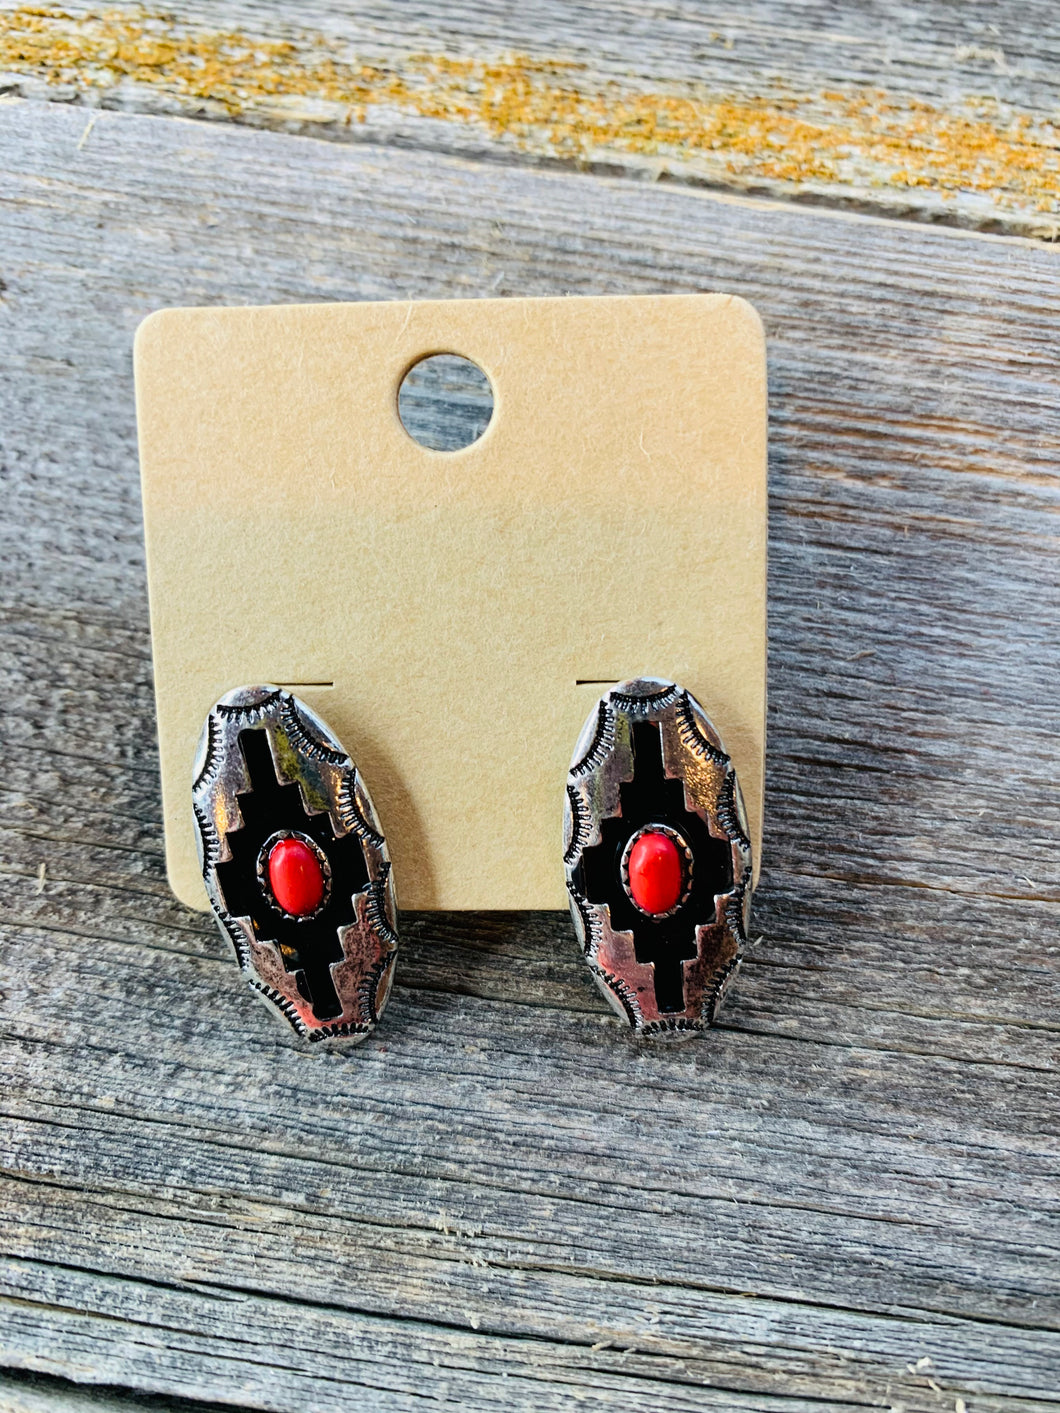 Silver and red earrings